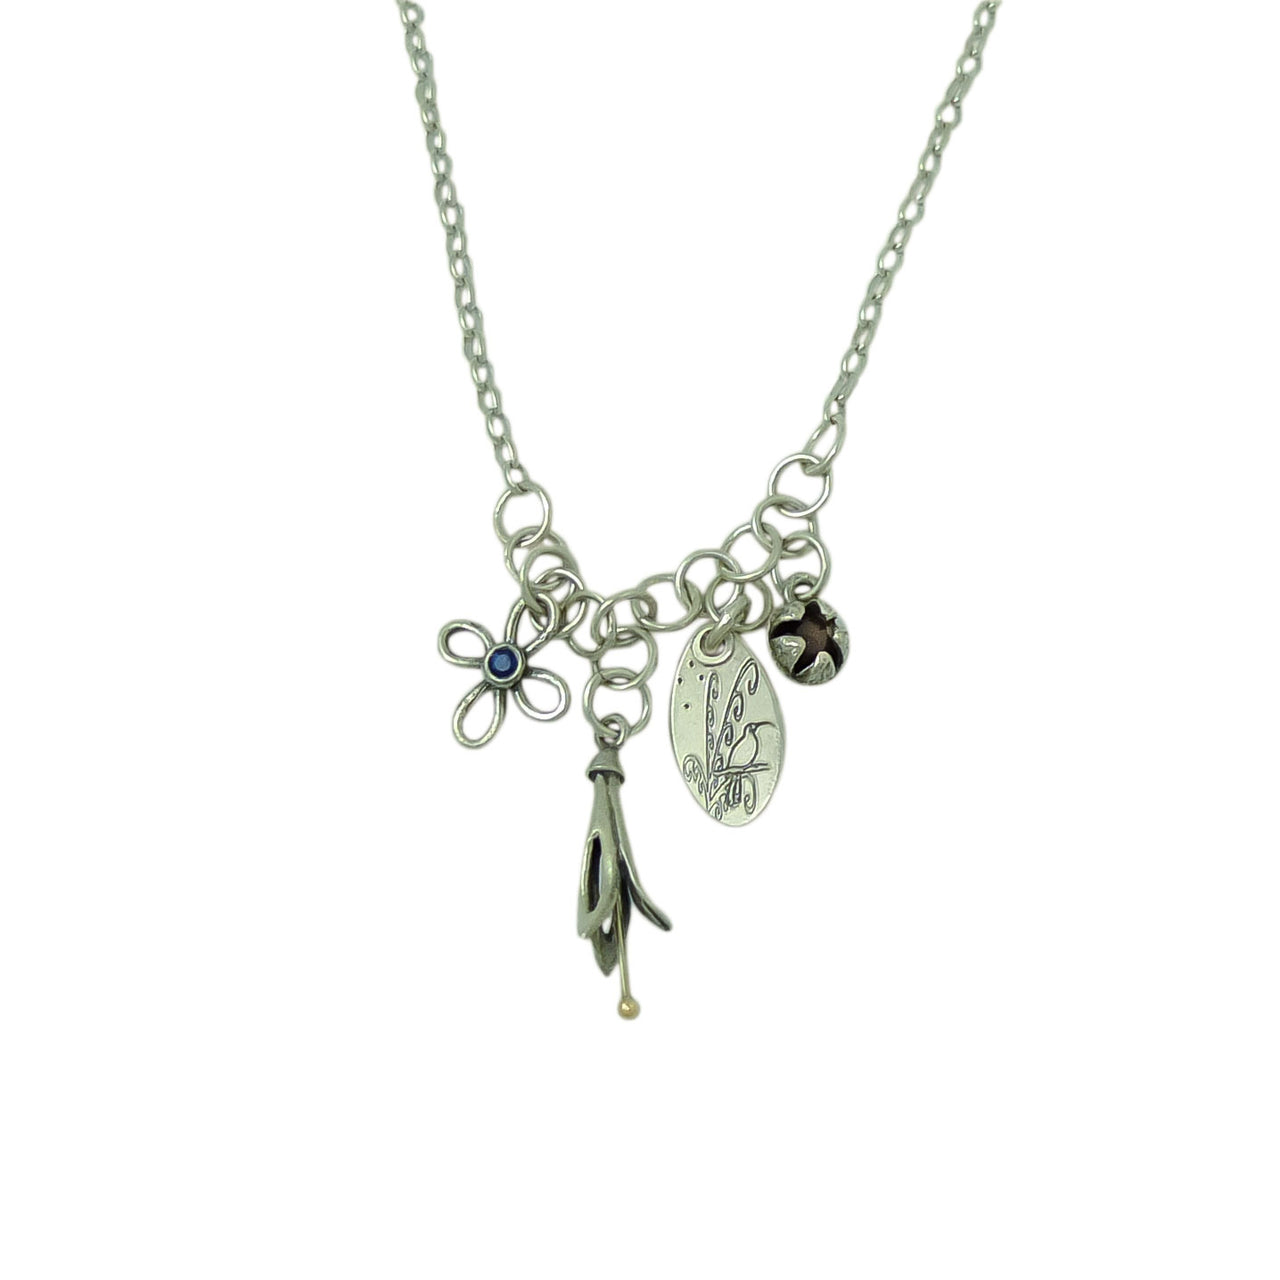 Birdsong Charm Necklace